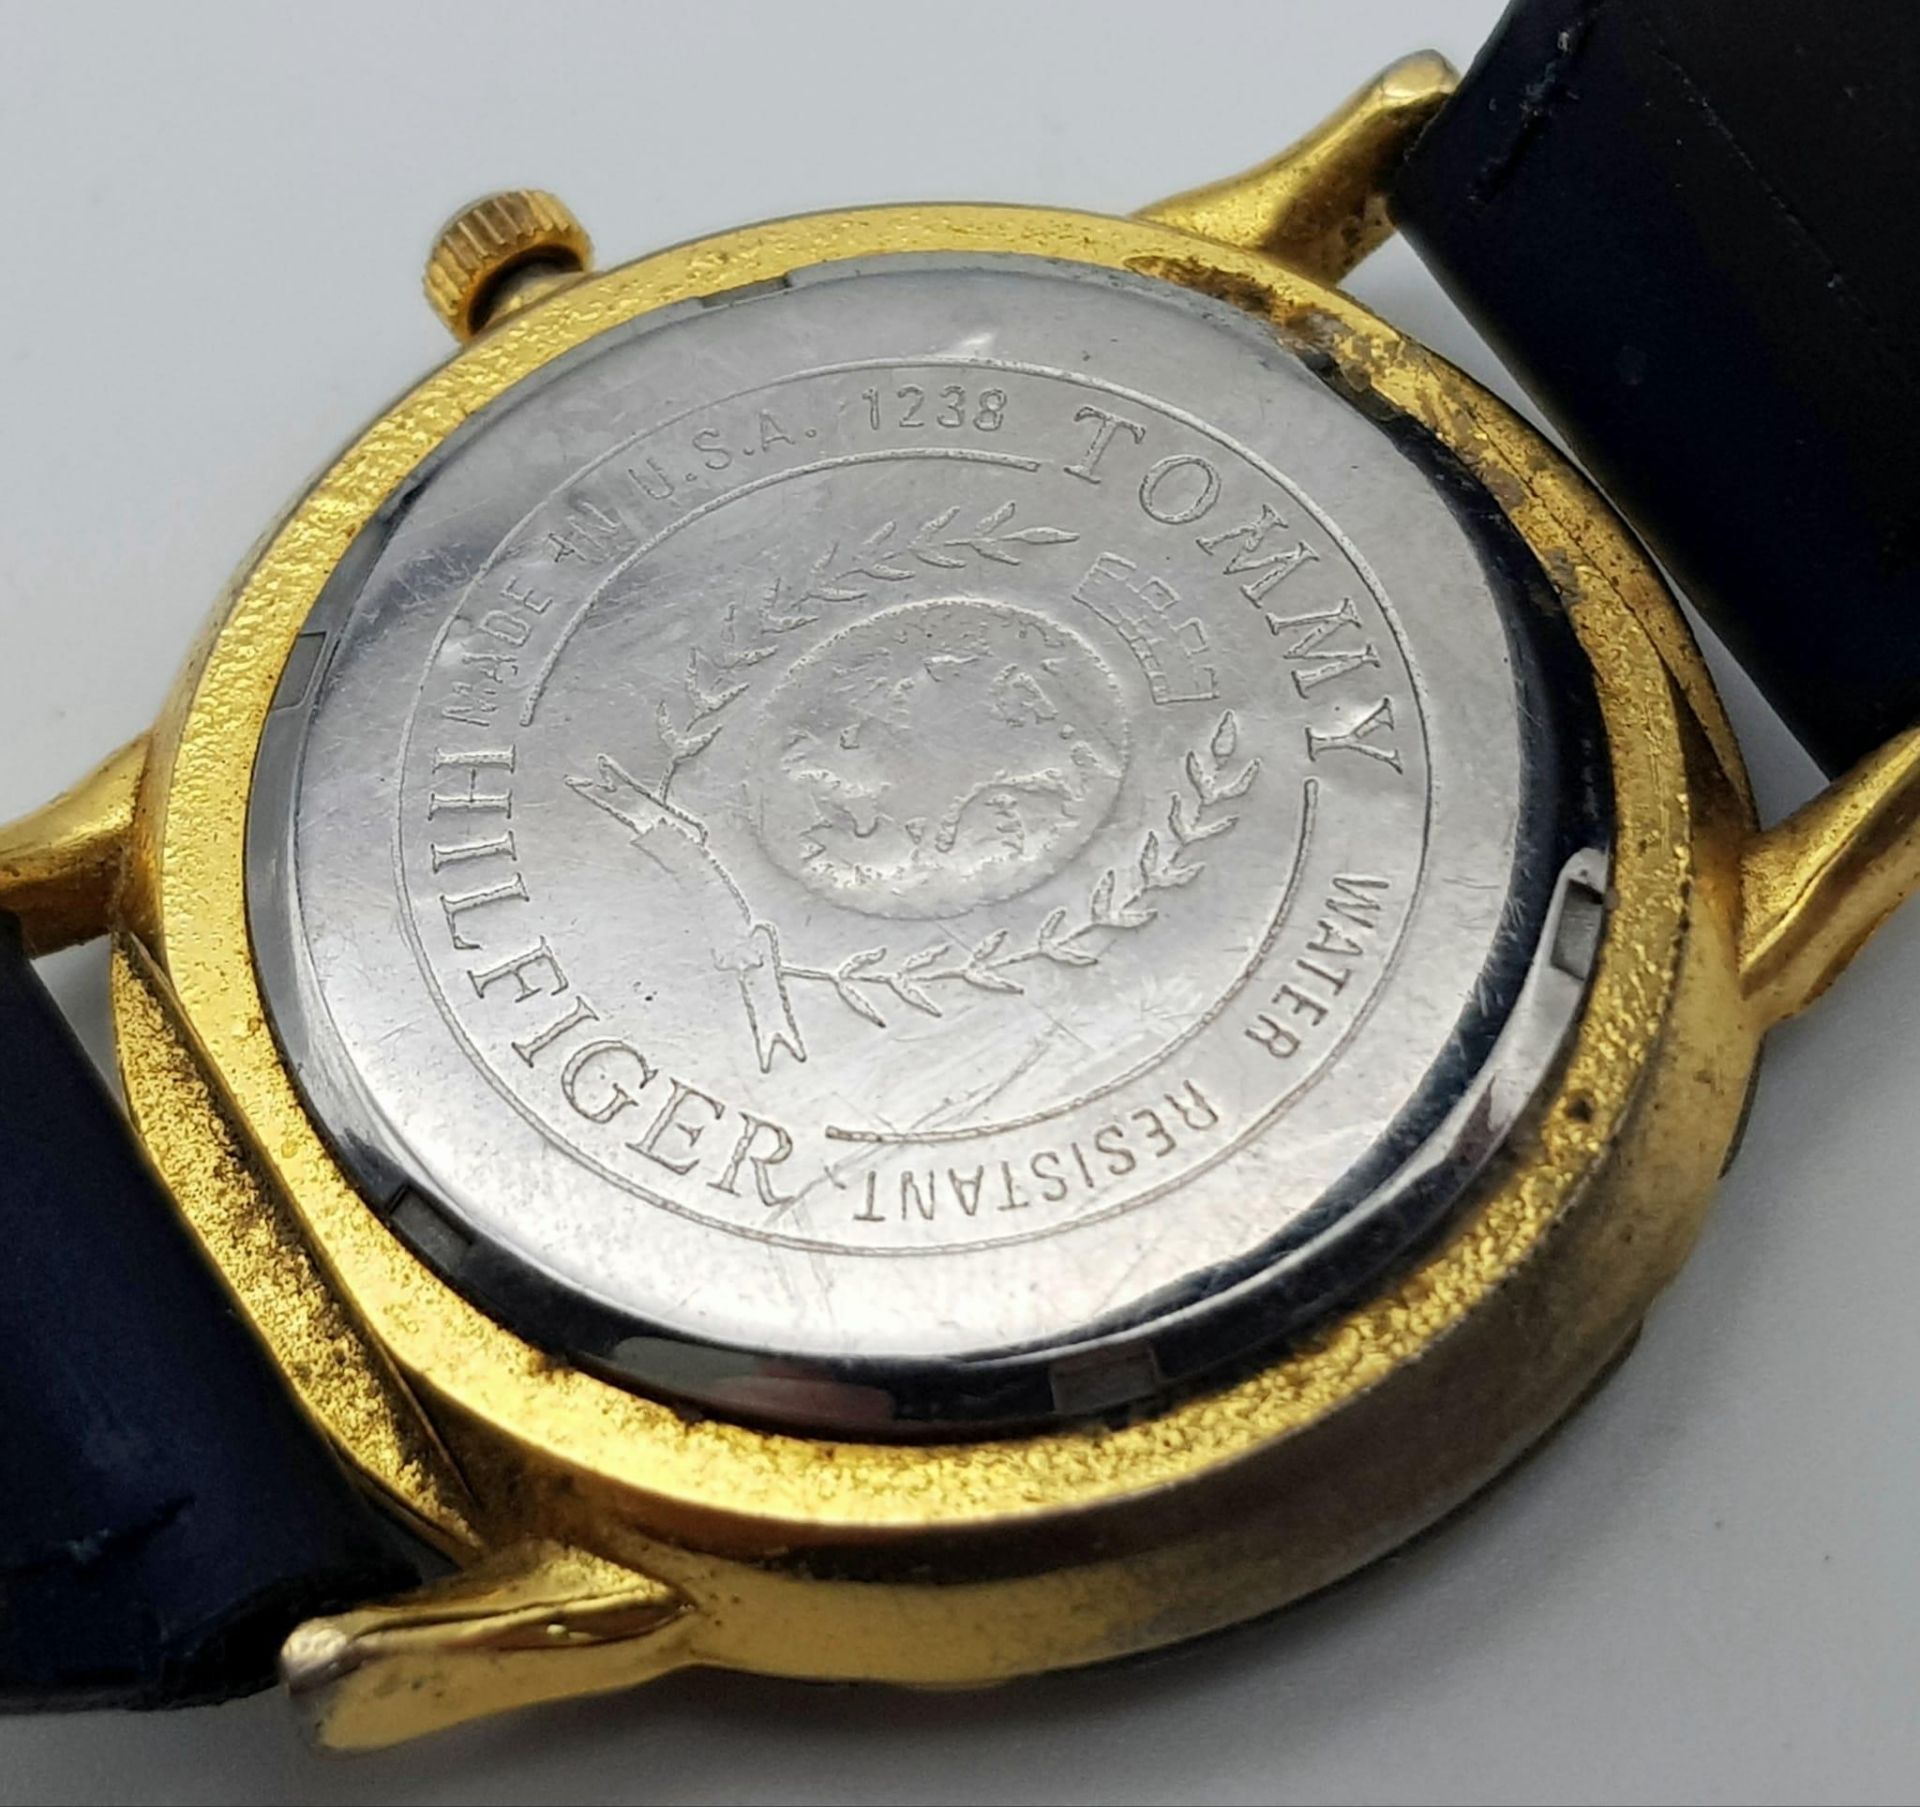 TOMMY HILFIGER WATCH REQUIRES NEW BATTERY AF - Image 5 of 5